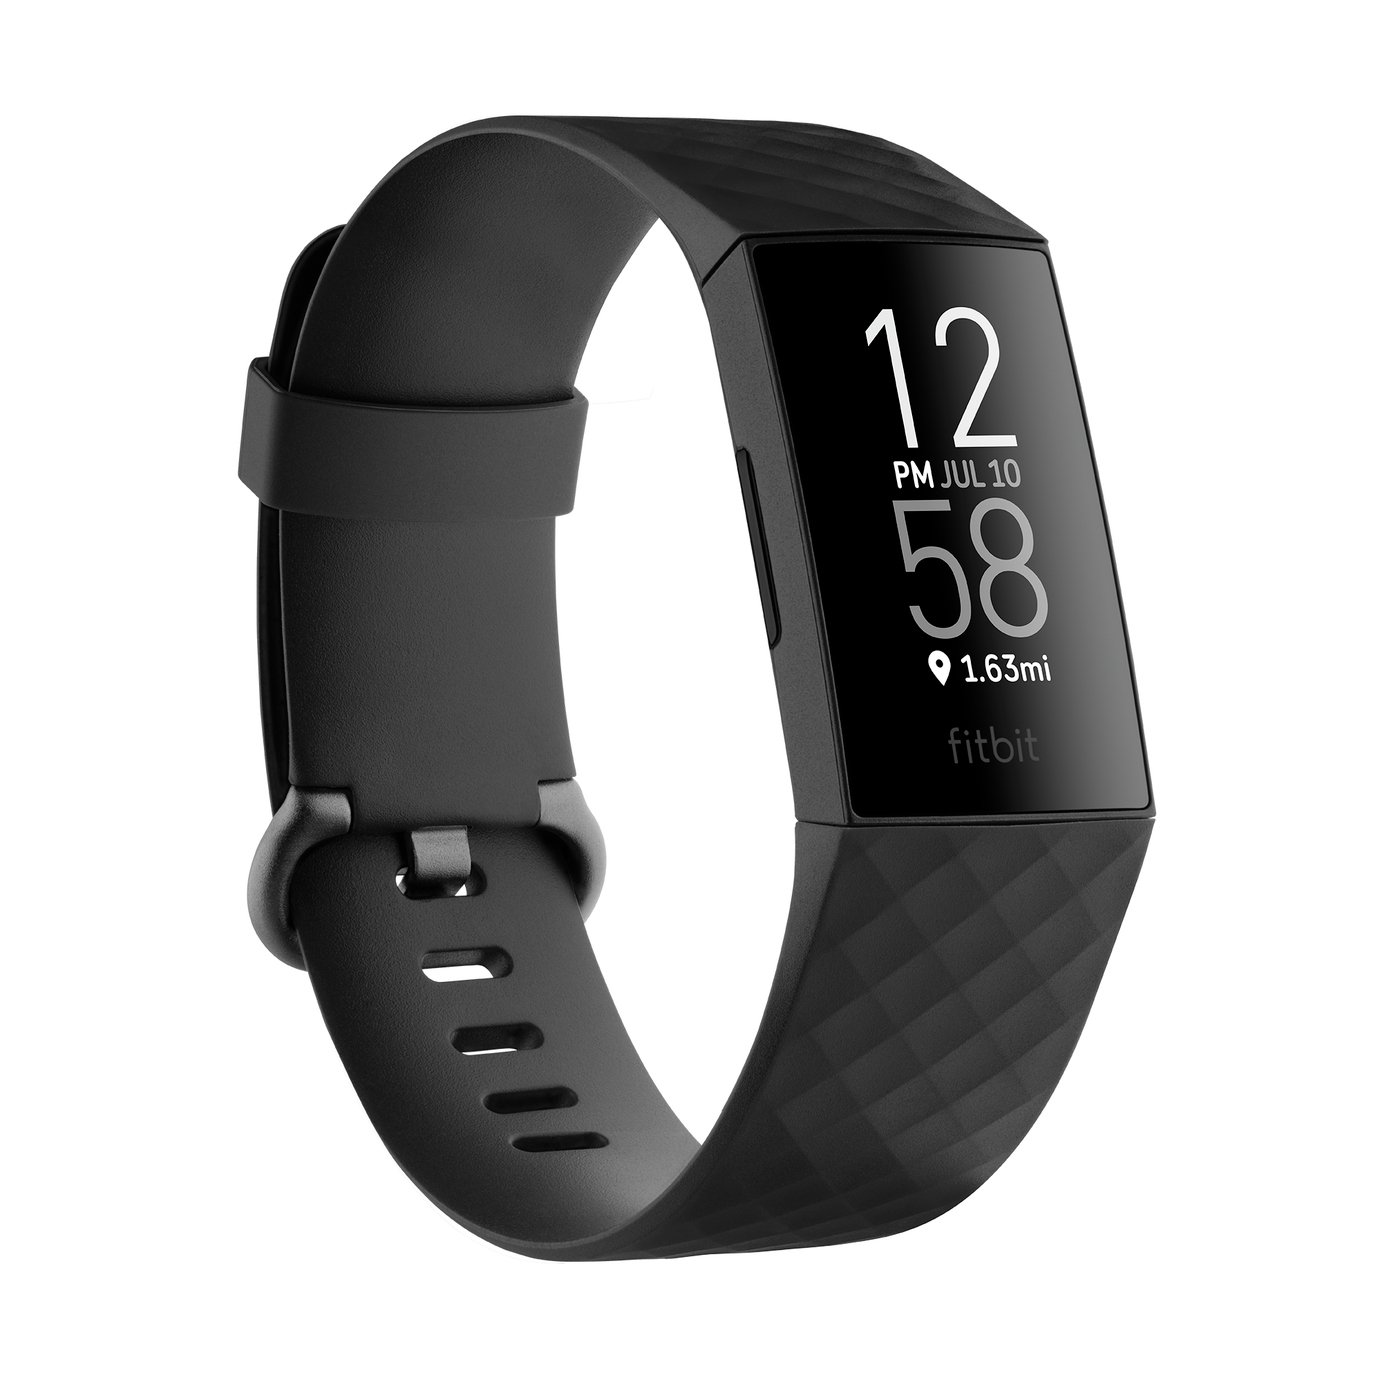 fitbit physical store